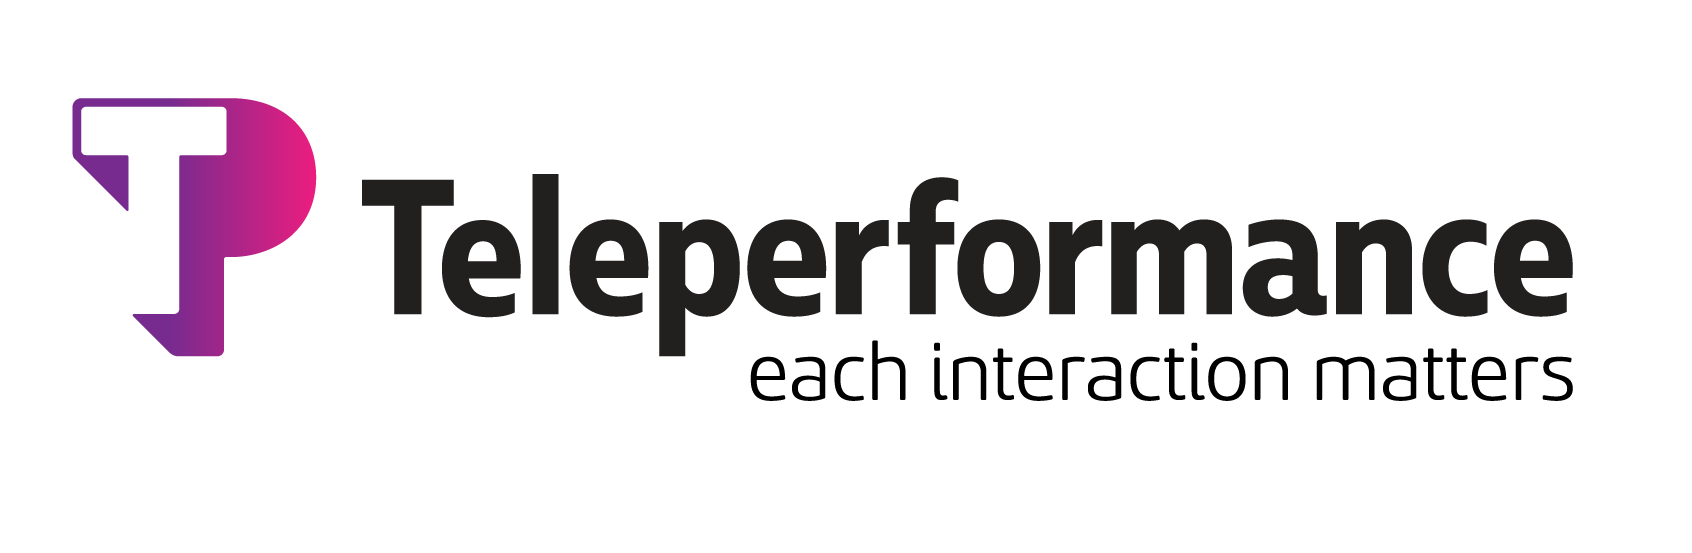 teleperformance-the-tent-partnership-for-refugees